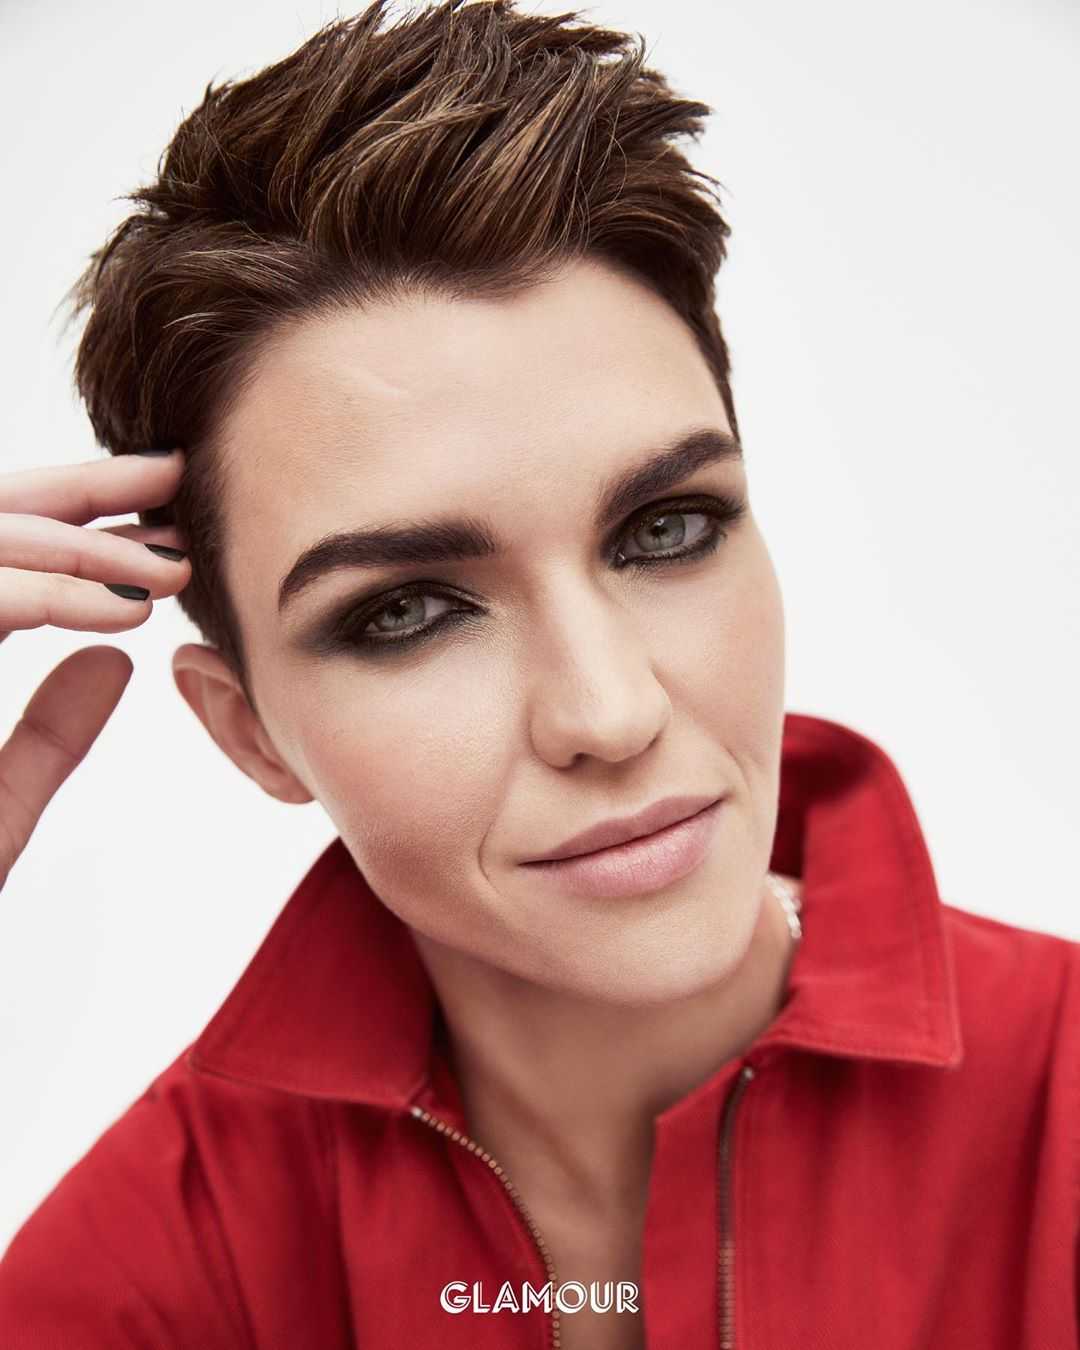 70+ Hot Pictures Of Ruby Rose – Batgirl In Arrowverse And Orange Is The New Black Star. 33